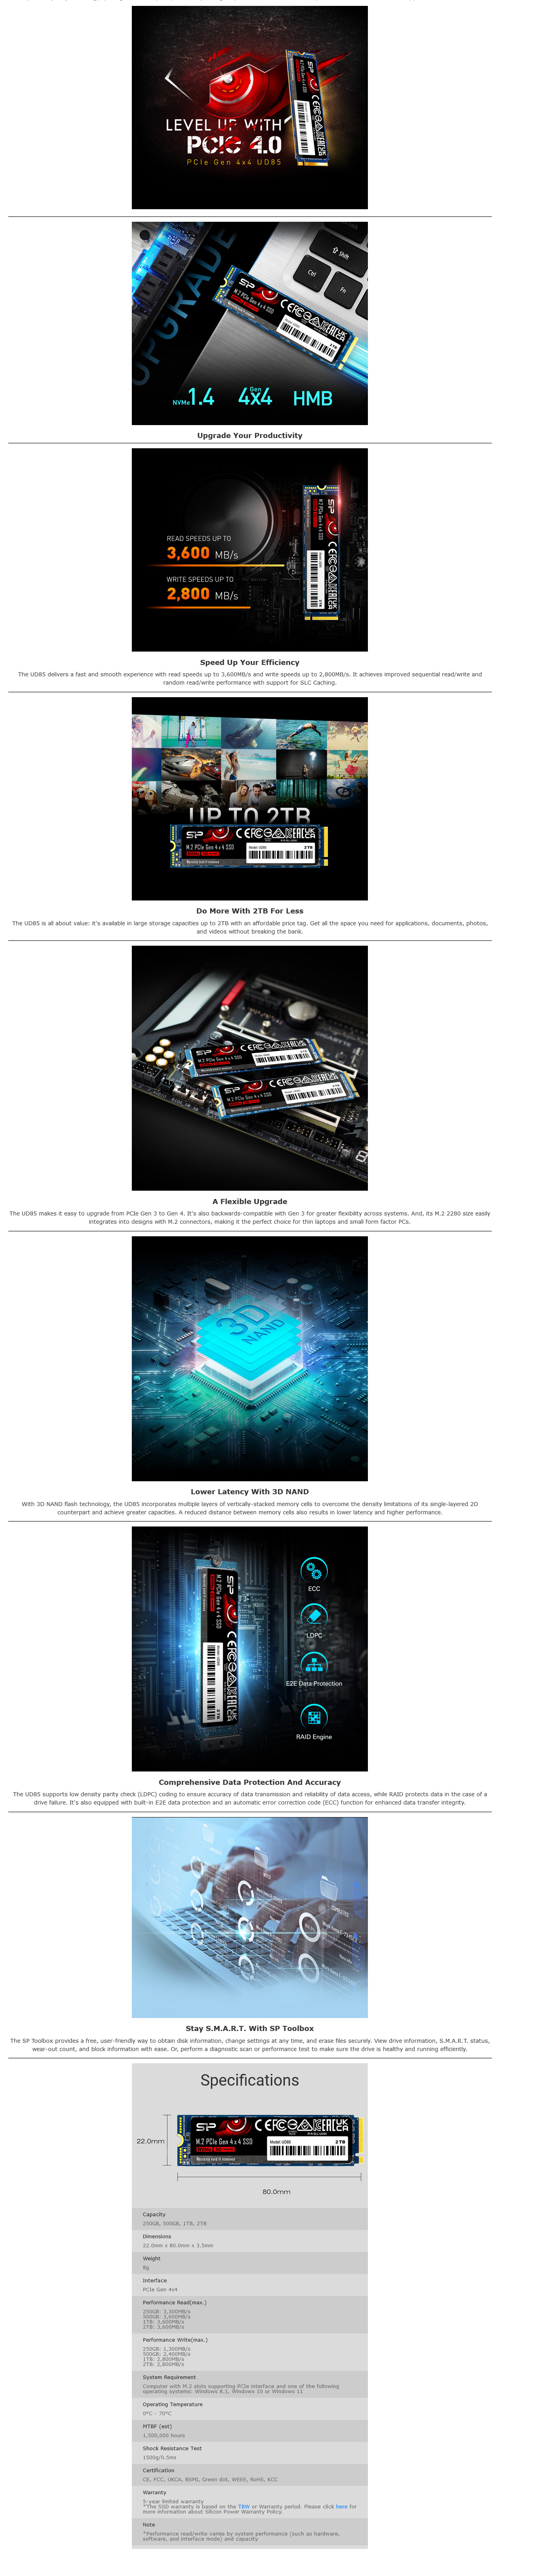 A large marketing image providing additional information about the product Silicon Power UD85 PCIe 4.0 NVMe M.2 SSD - 500GB - Additional alt info not provided